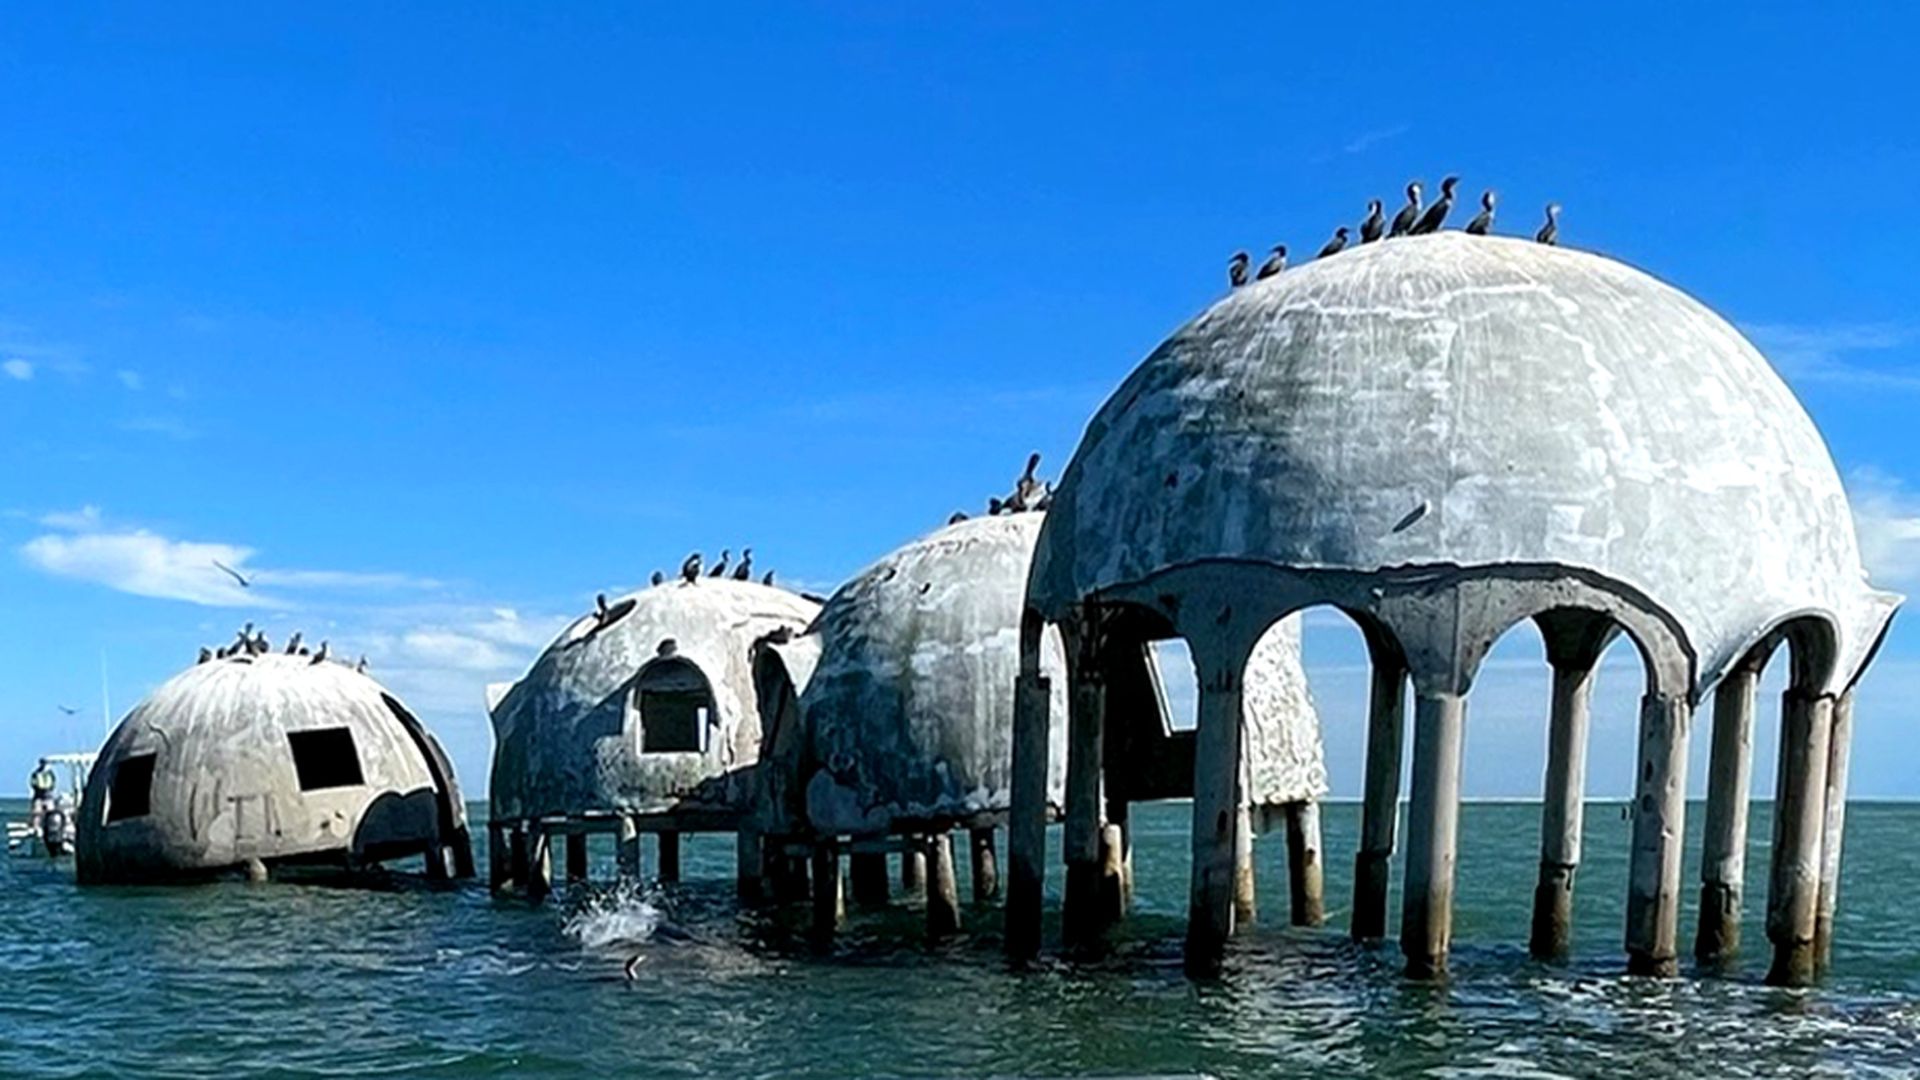 Marco Island's Cape Romano dome house with birds sitting on top of the domes.